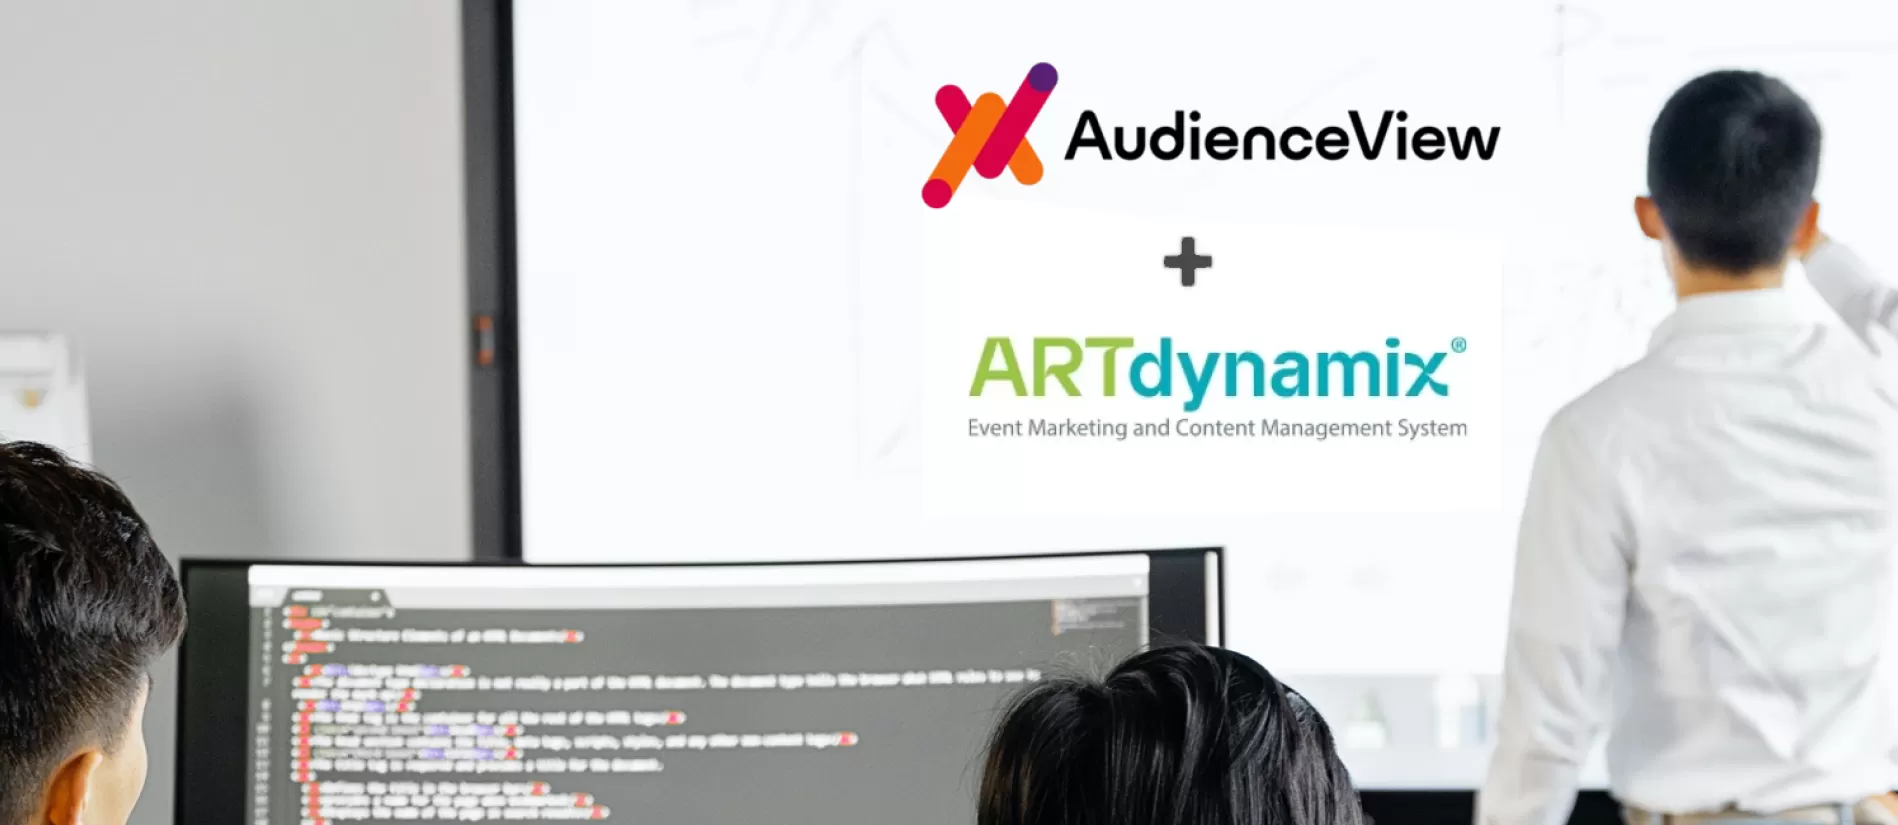 ARTdynamix and audienceview is a perfect combination